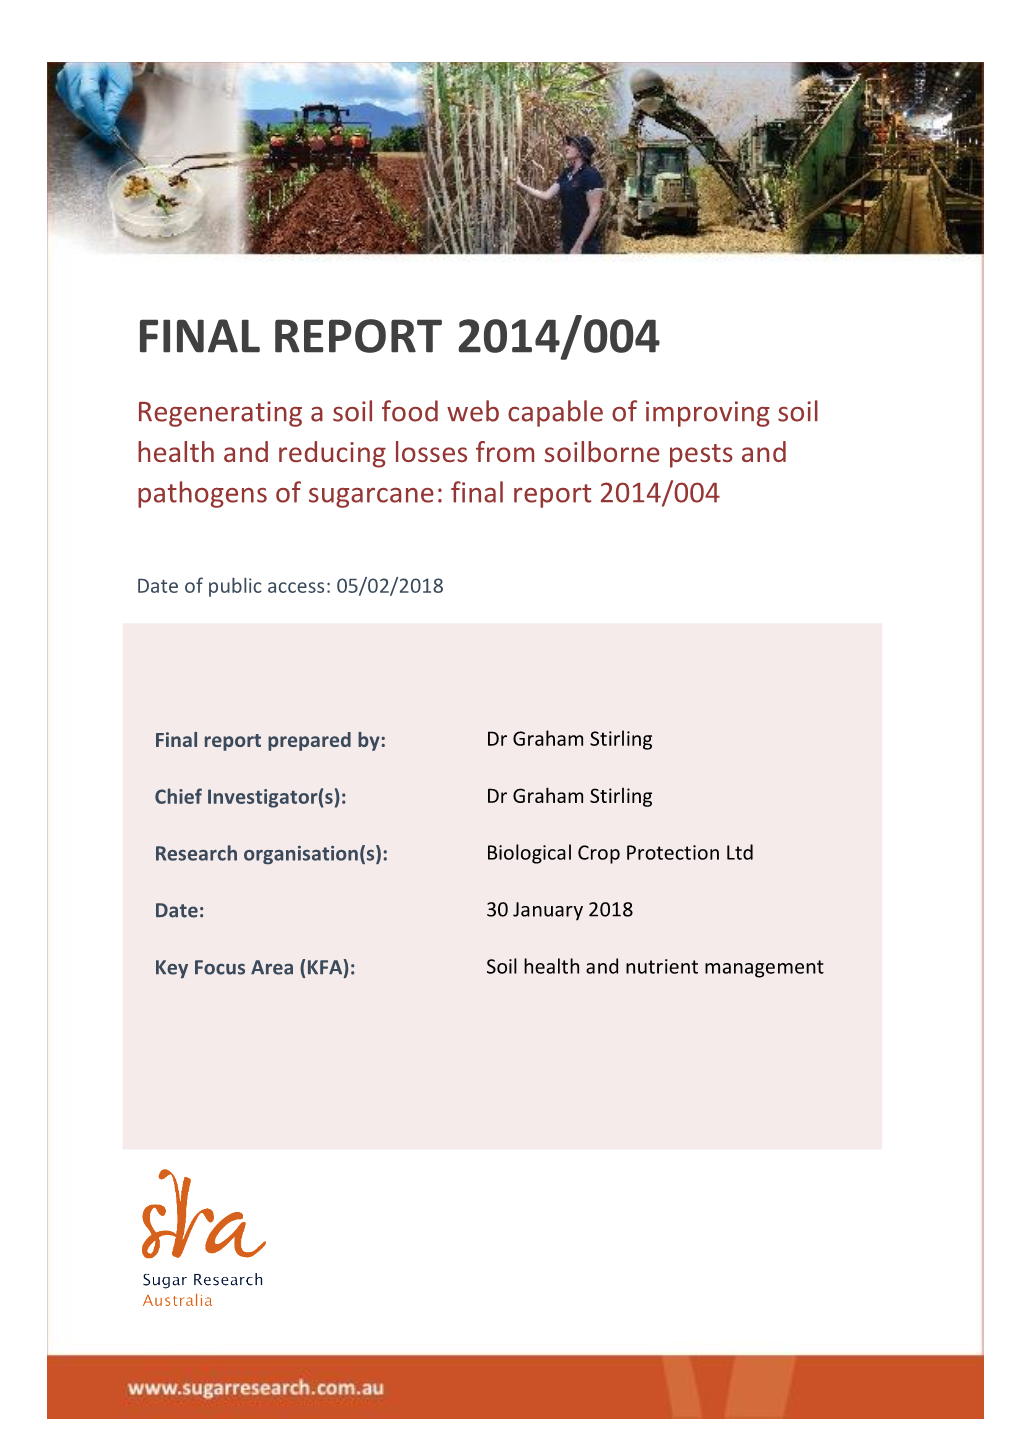 Regenerating a Soil Food Web Capable of Improving Soil Health and Reducing Losses from Soilborne Pests and Pathogens of Sugarcane: Final Report 2014/004